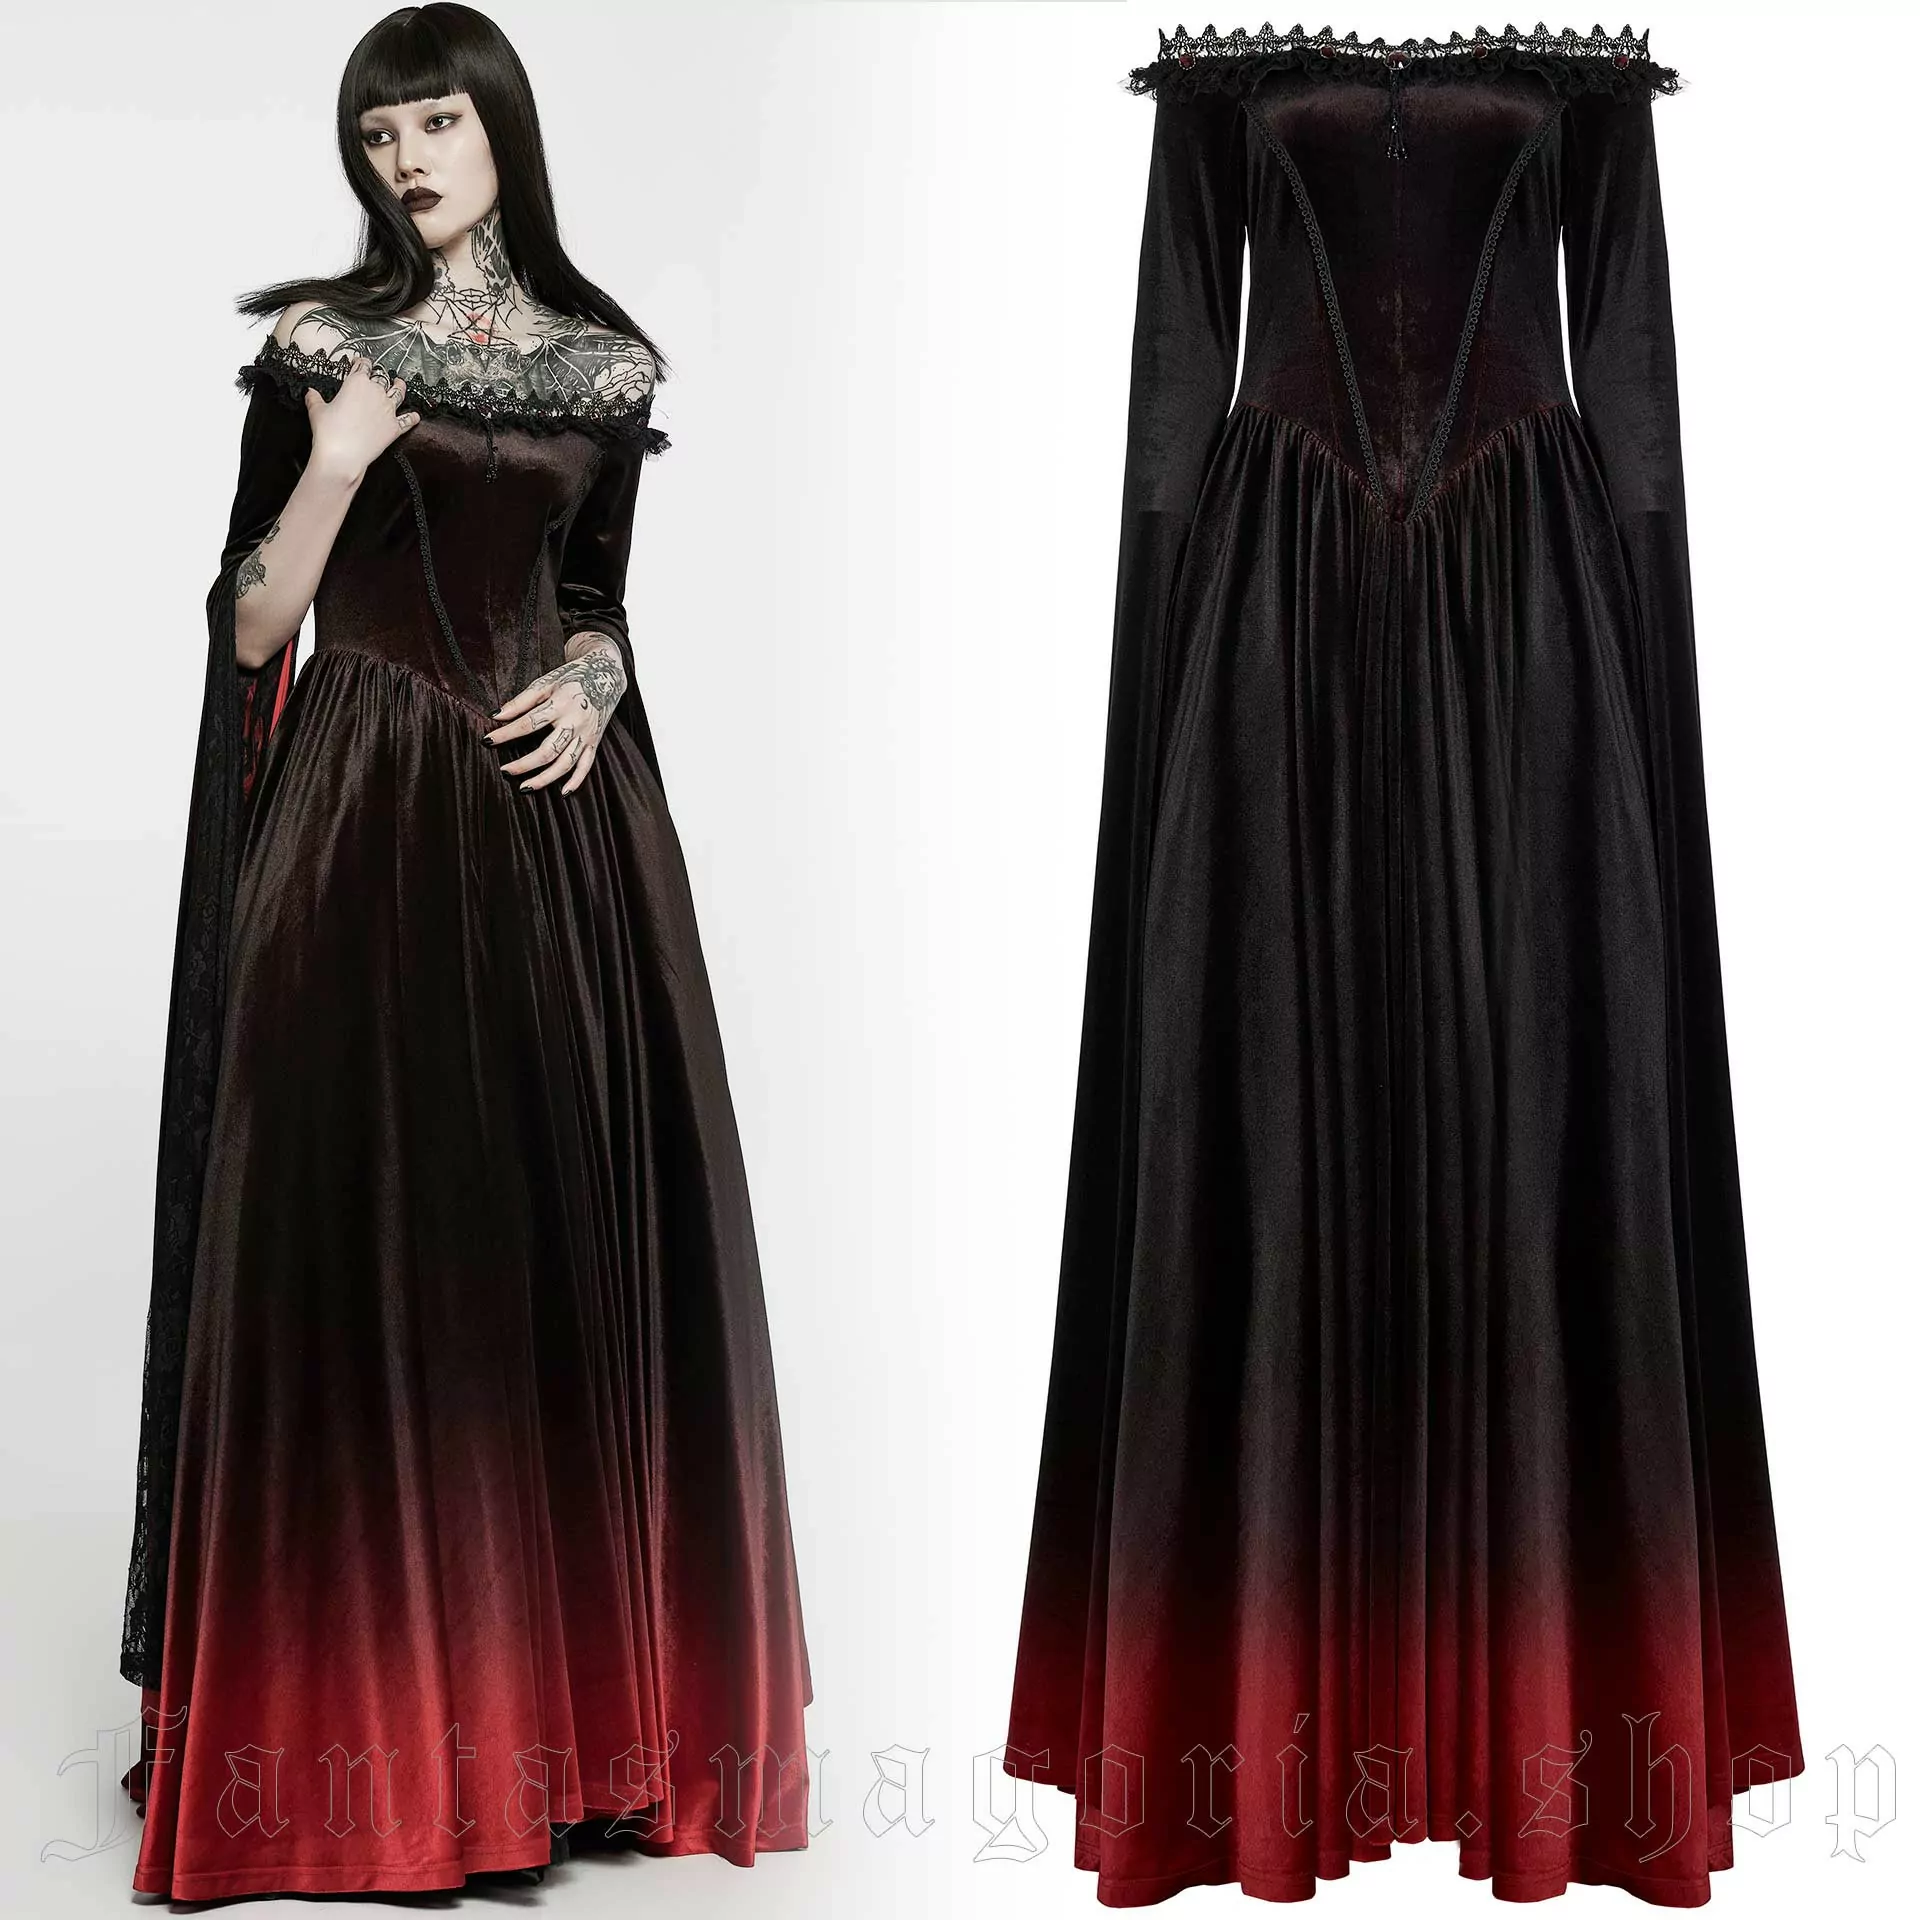 The Masquerade Gothic Victorian Velvet and Lace Vampire Gown 